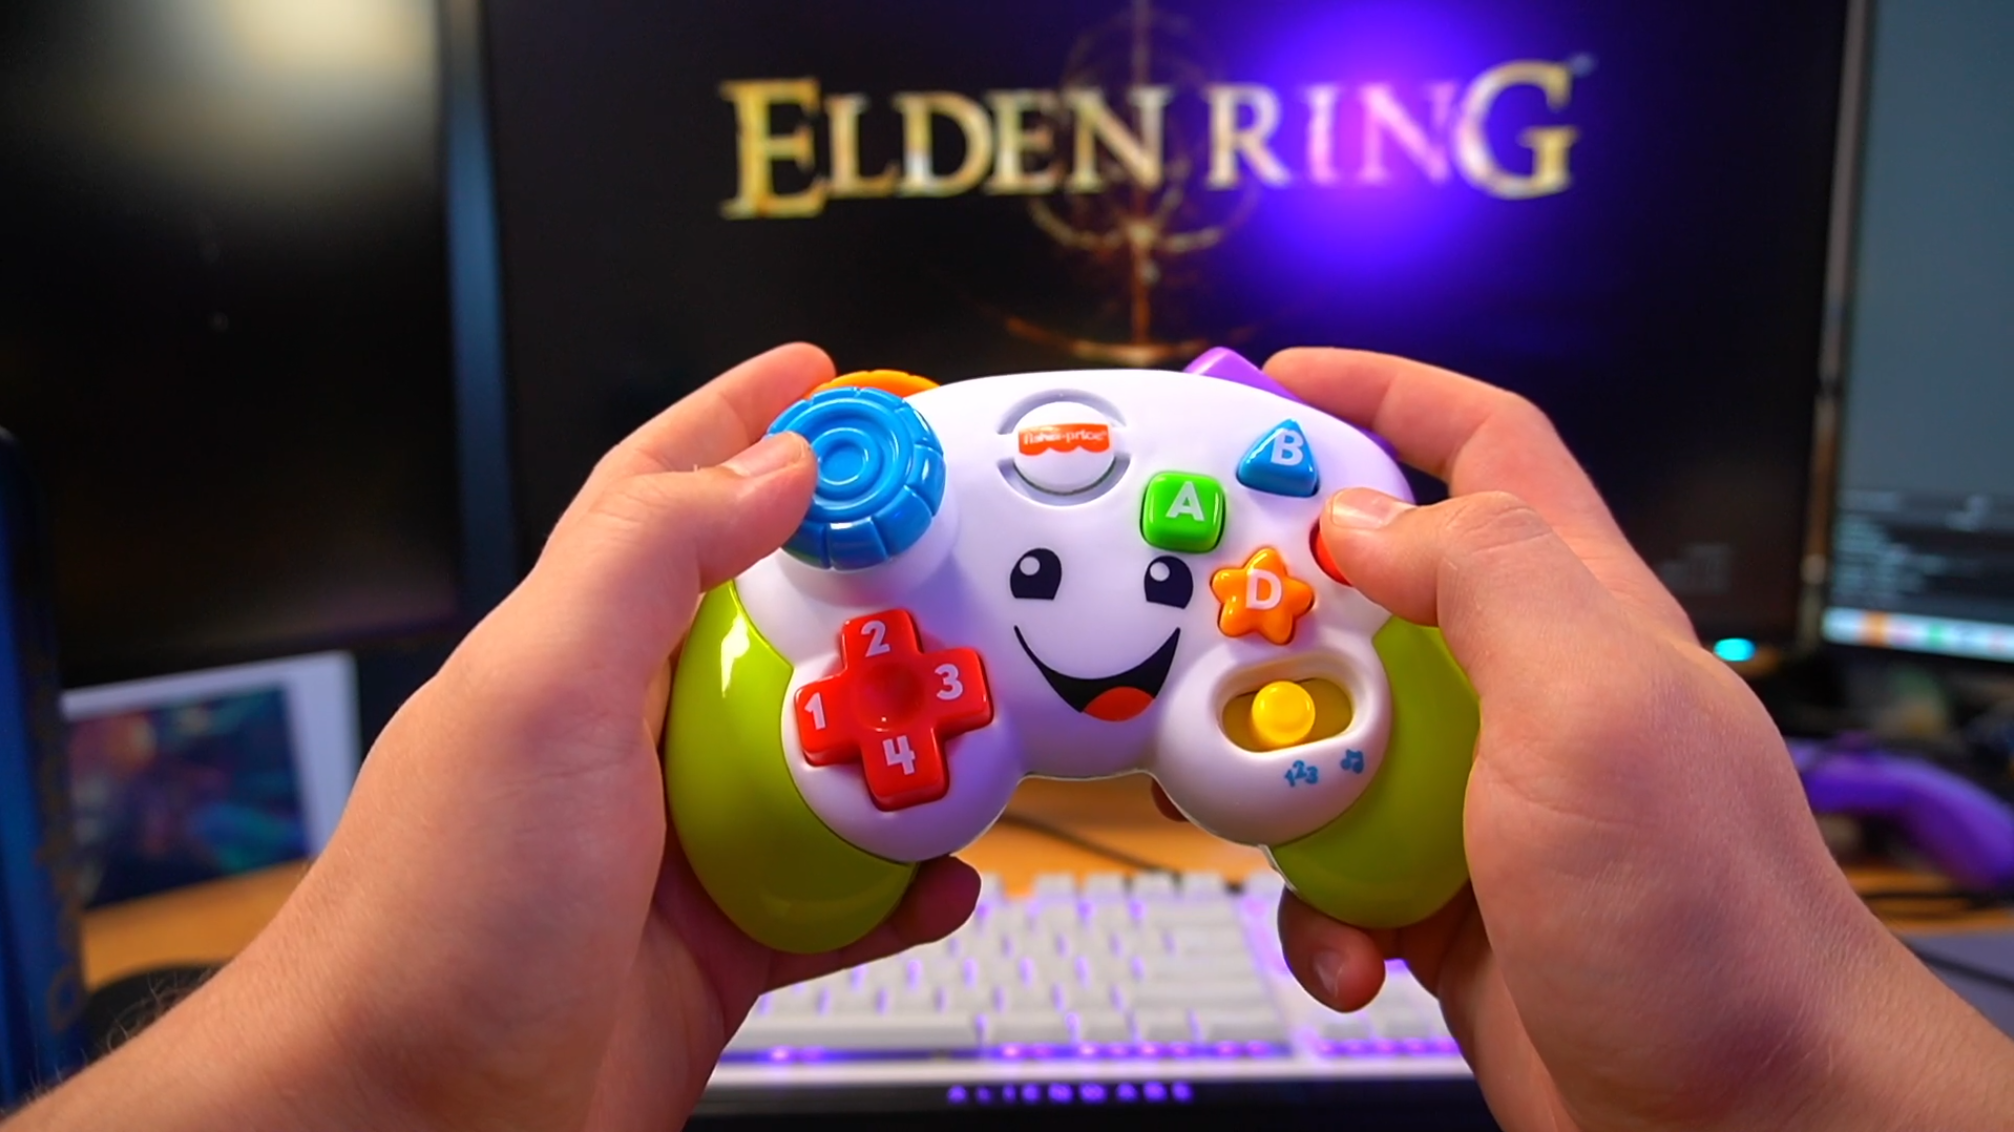 Elden Ring is harder with a modded Fisher-Price toy controller